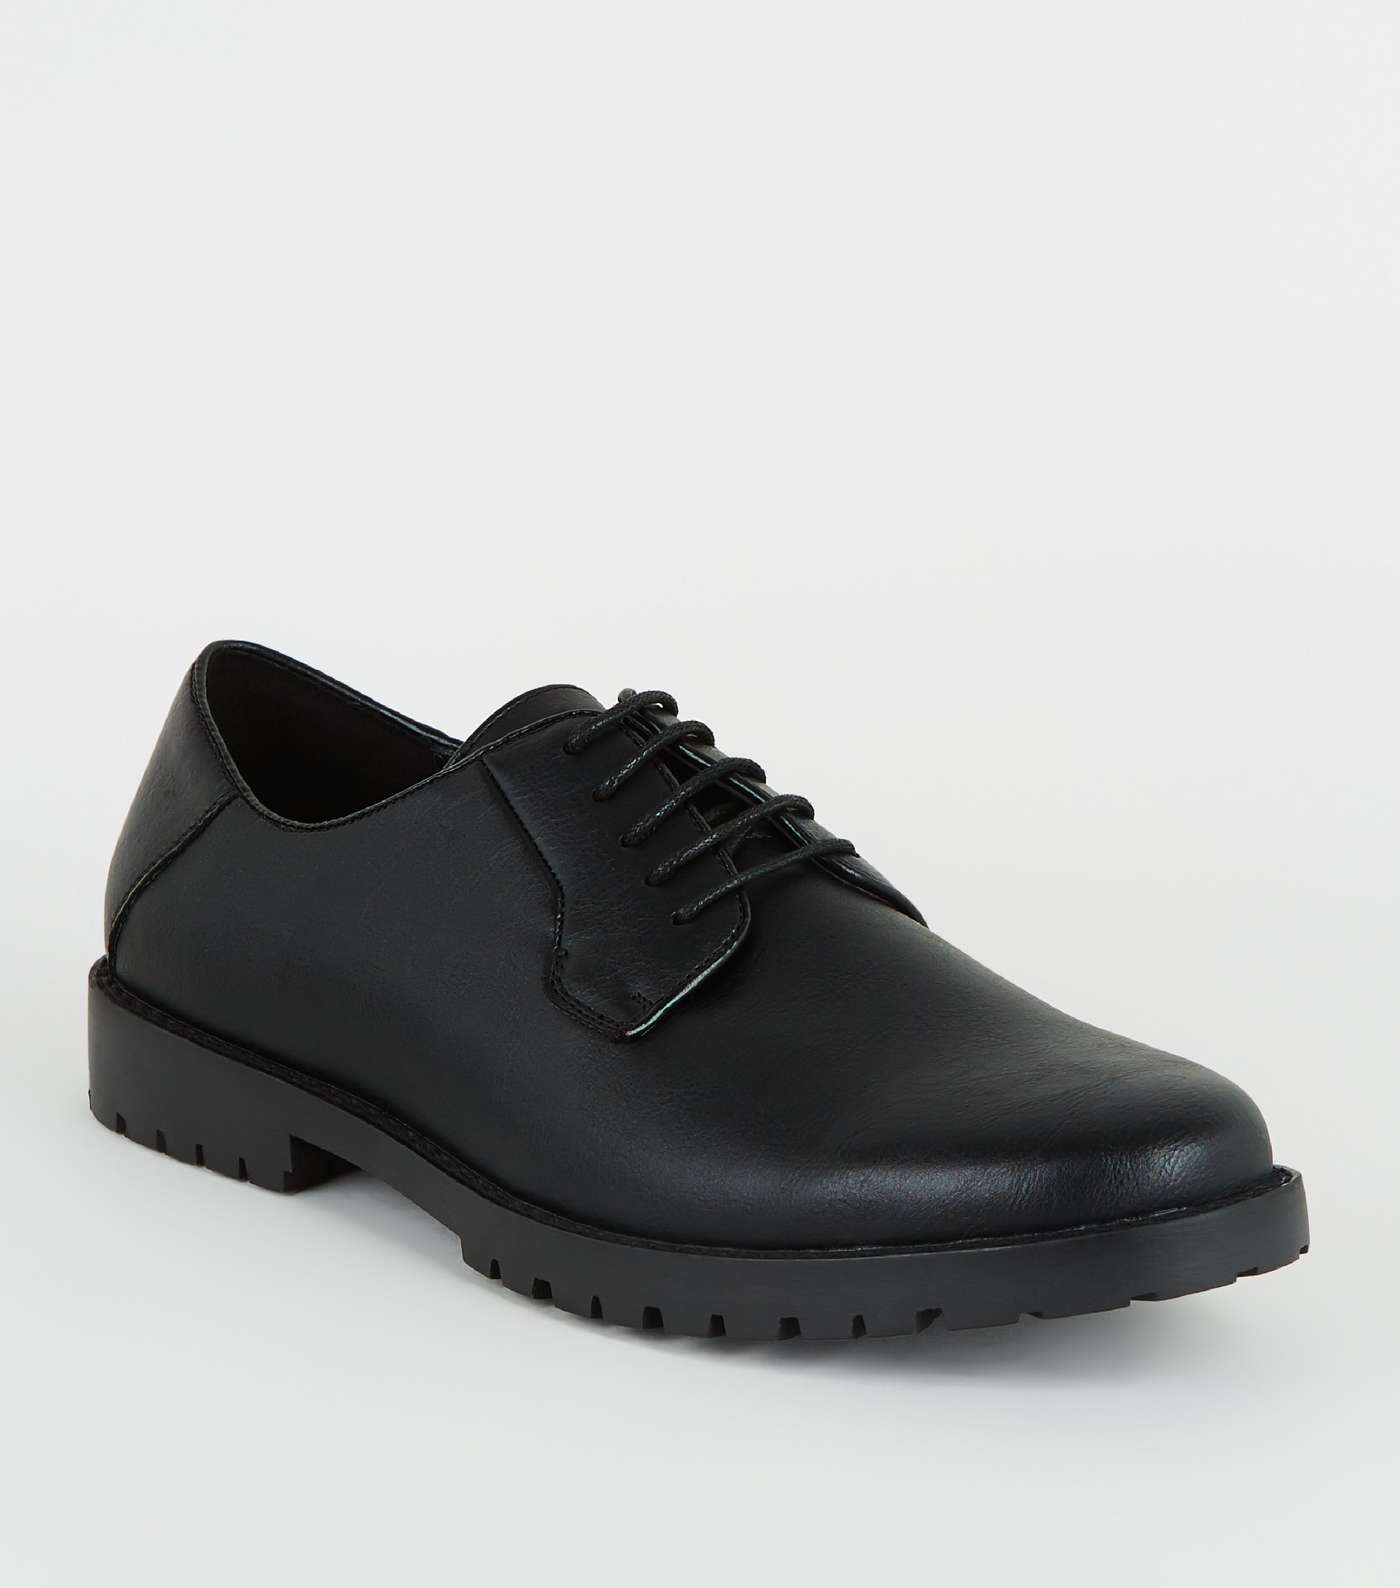 Black Leather-Look Cleated Derby Shoes Image 2